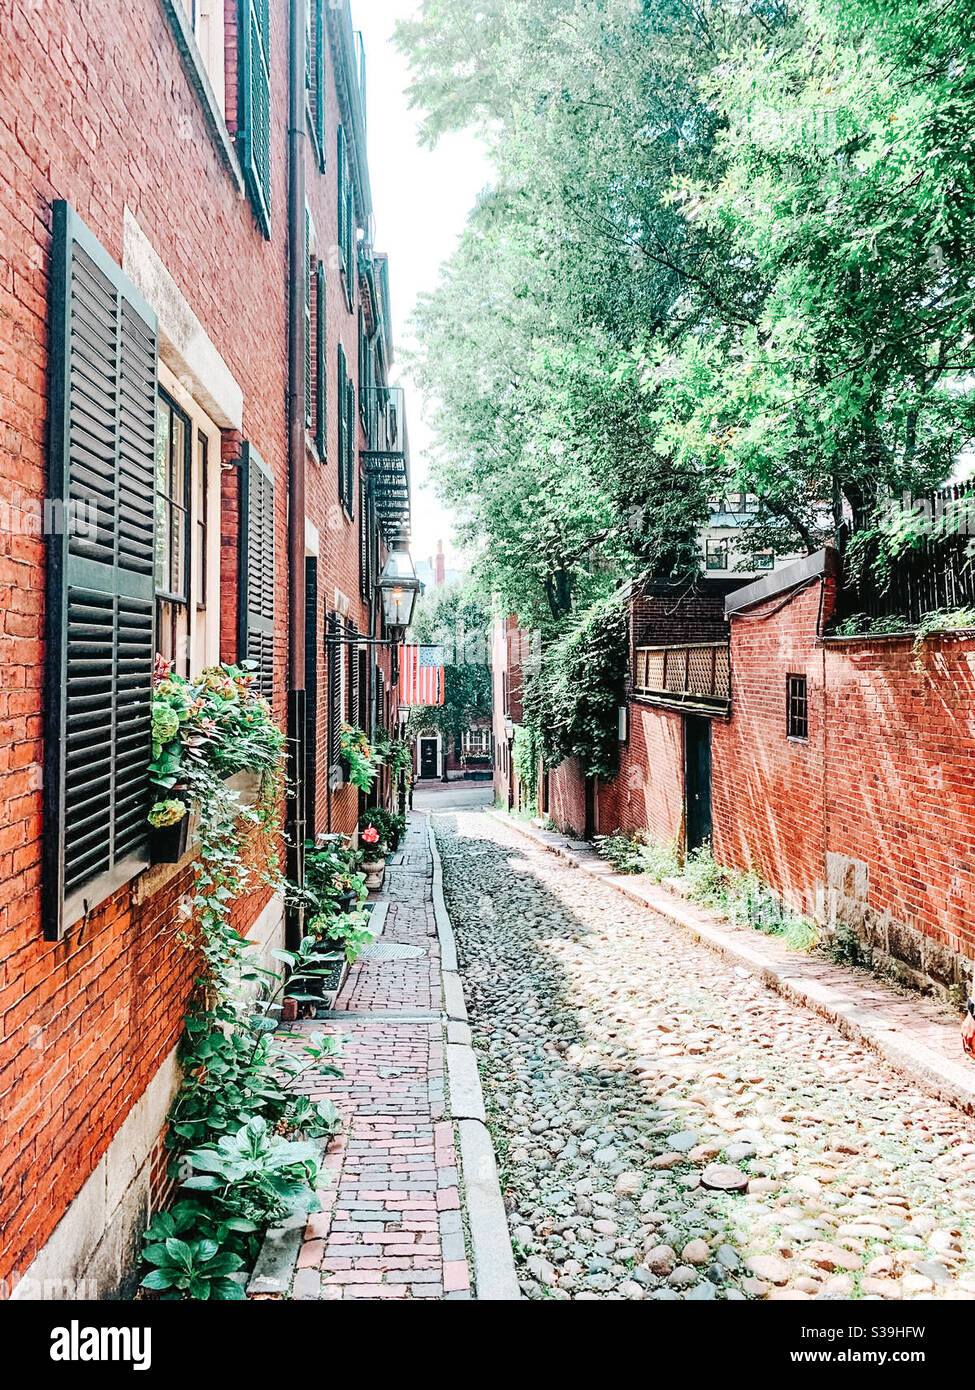 Acorn Street in Boston’s Beacon Hill historic neighborhoud, one of America’s most beautiful and atmospheric streets. Stock Photo